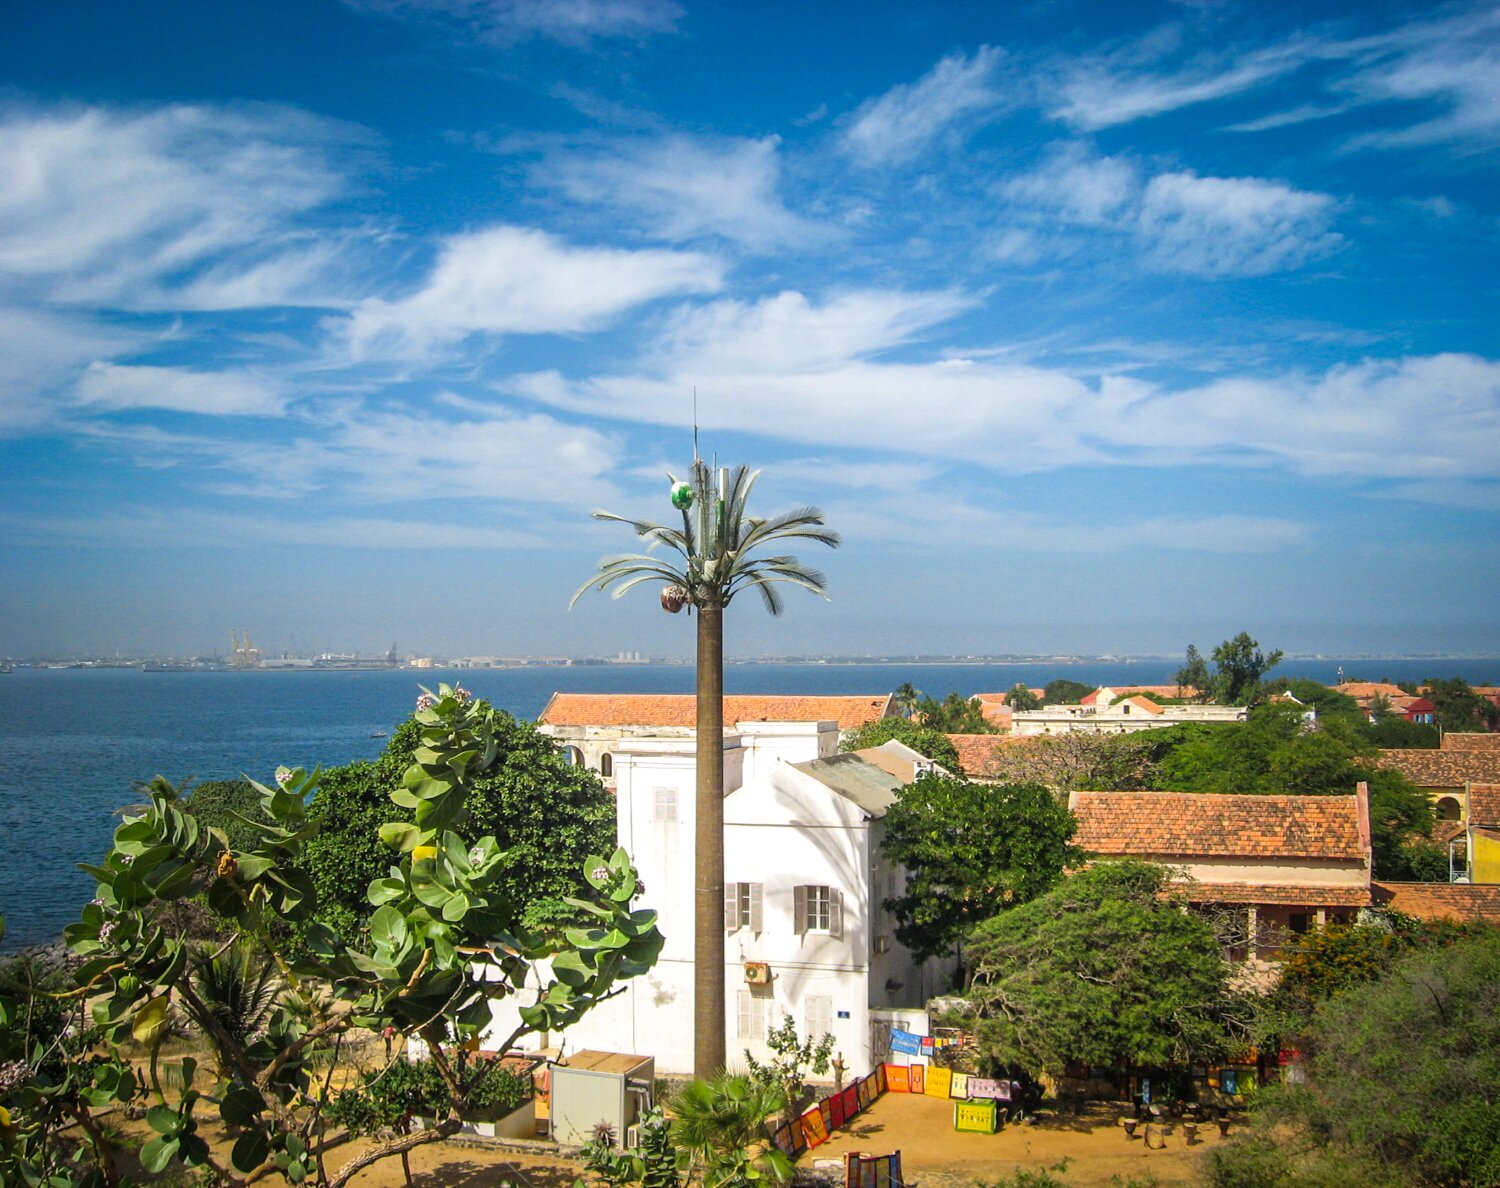 A cell tower disguised as a palm tree on Gorée Island, Dakar, Senegal.FLICKR by Dorothy Voorhees / CC BY-SA 2.0